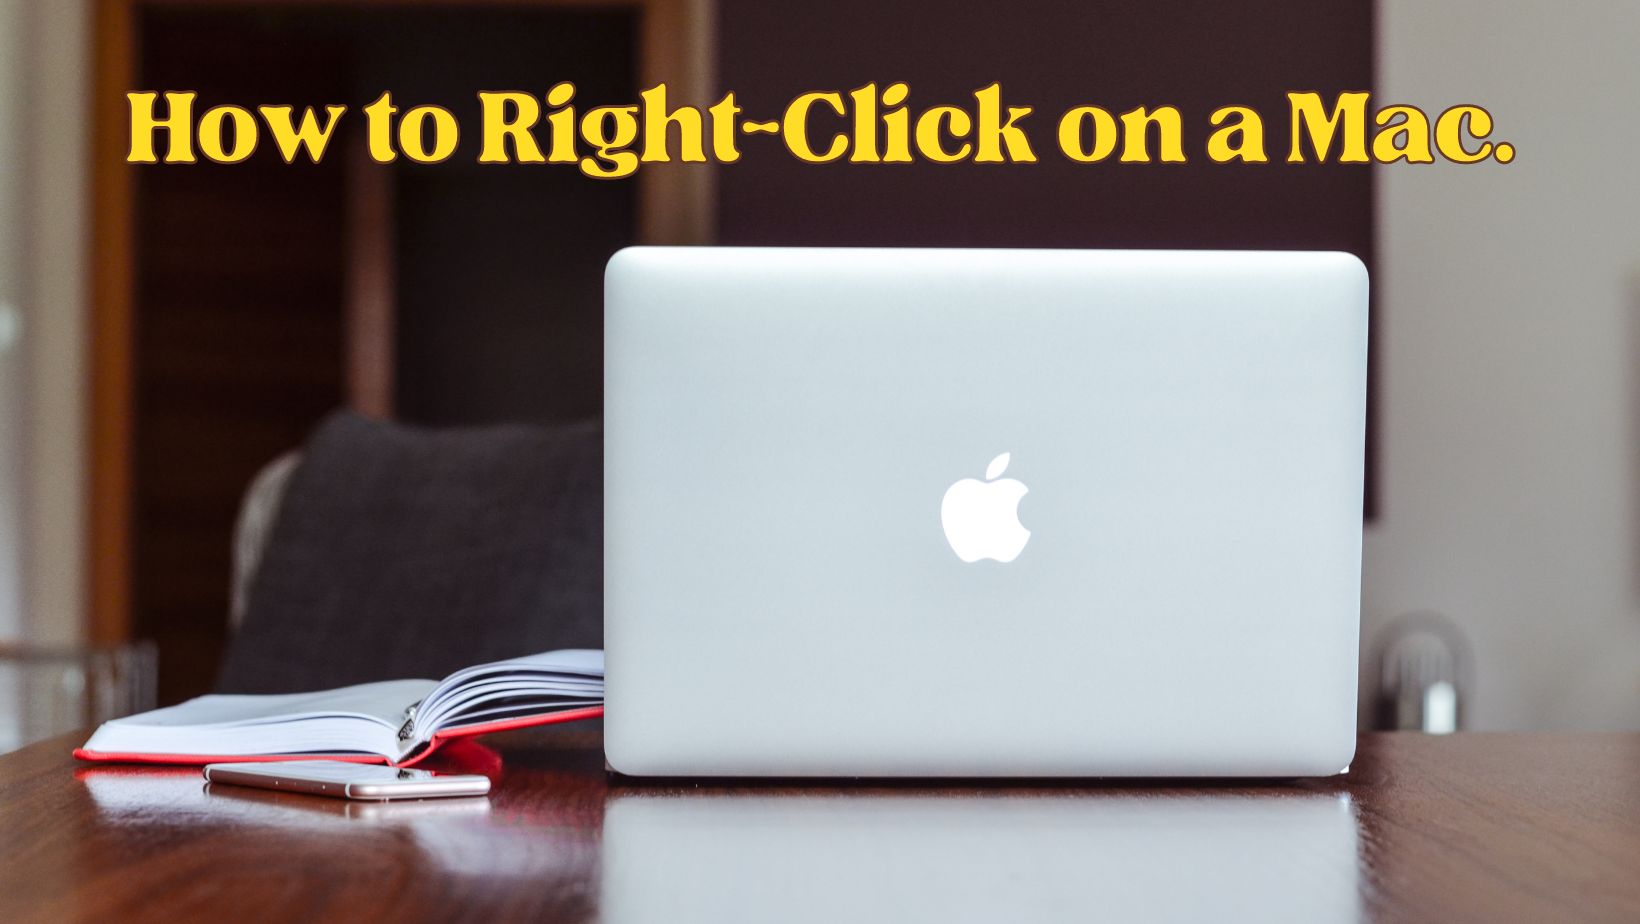 How to Right-Click on a Mac.